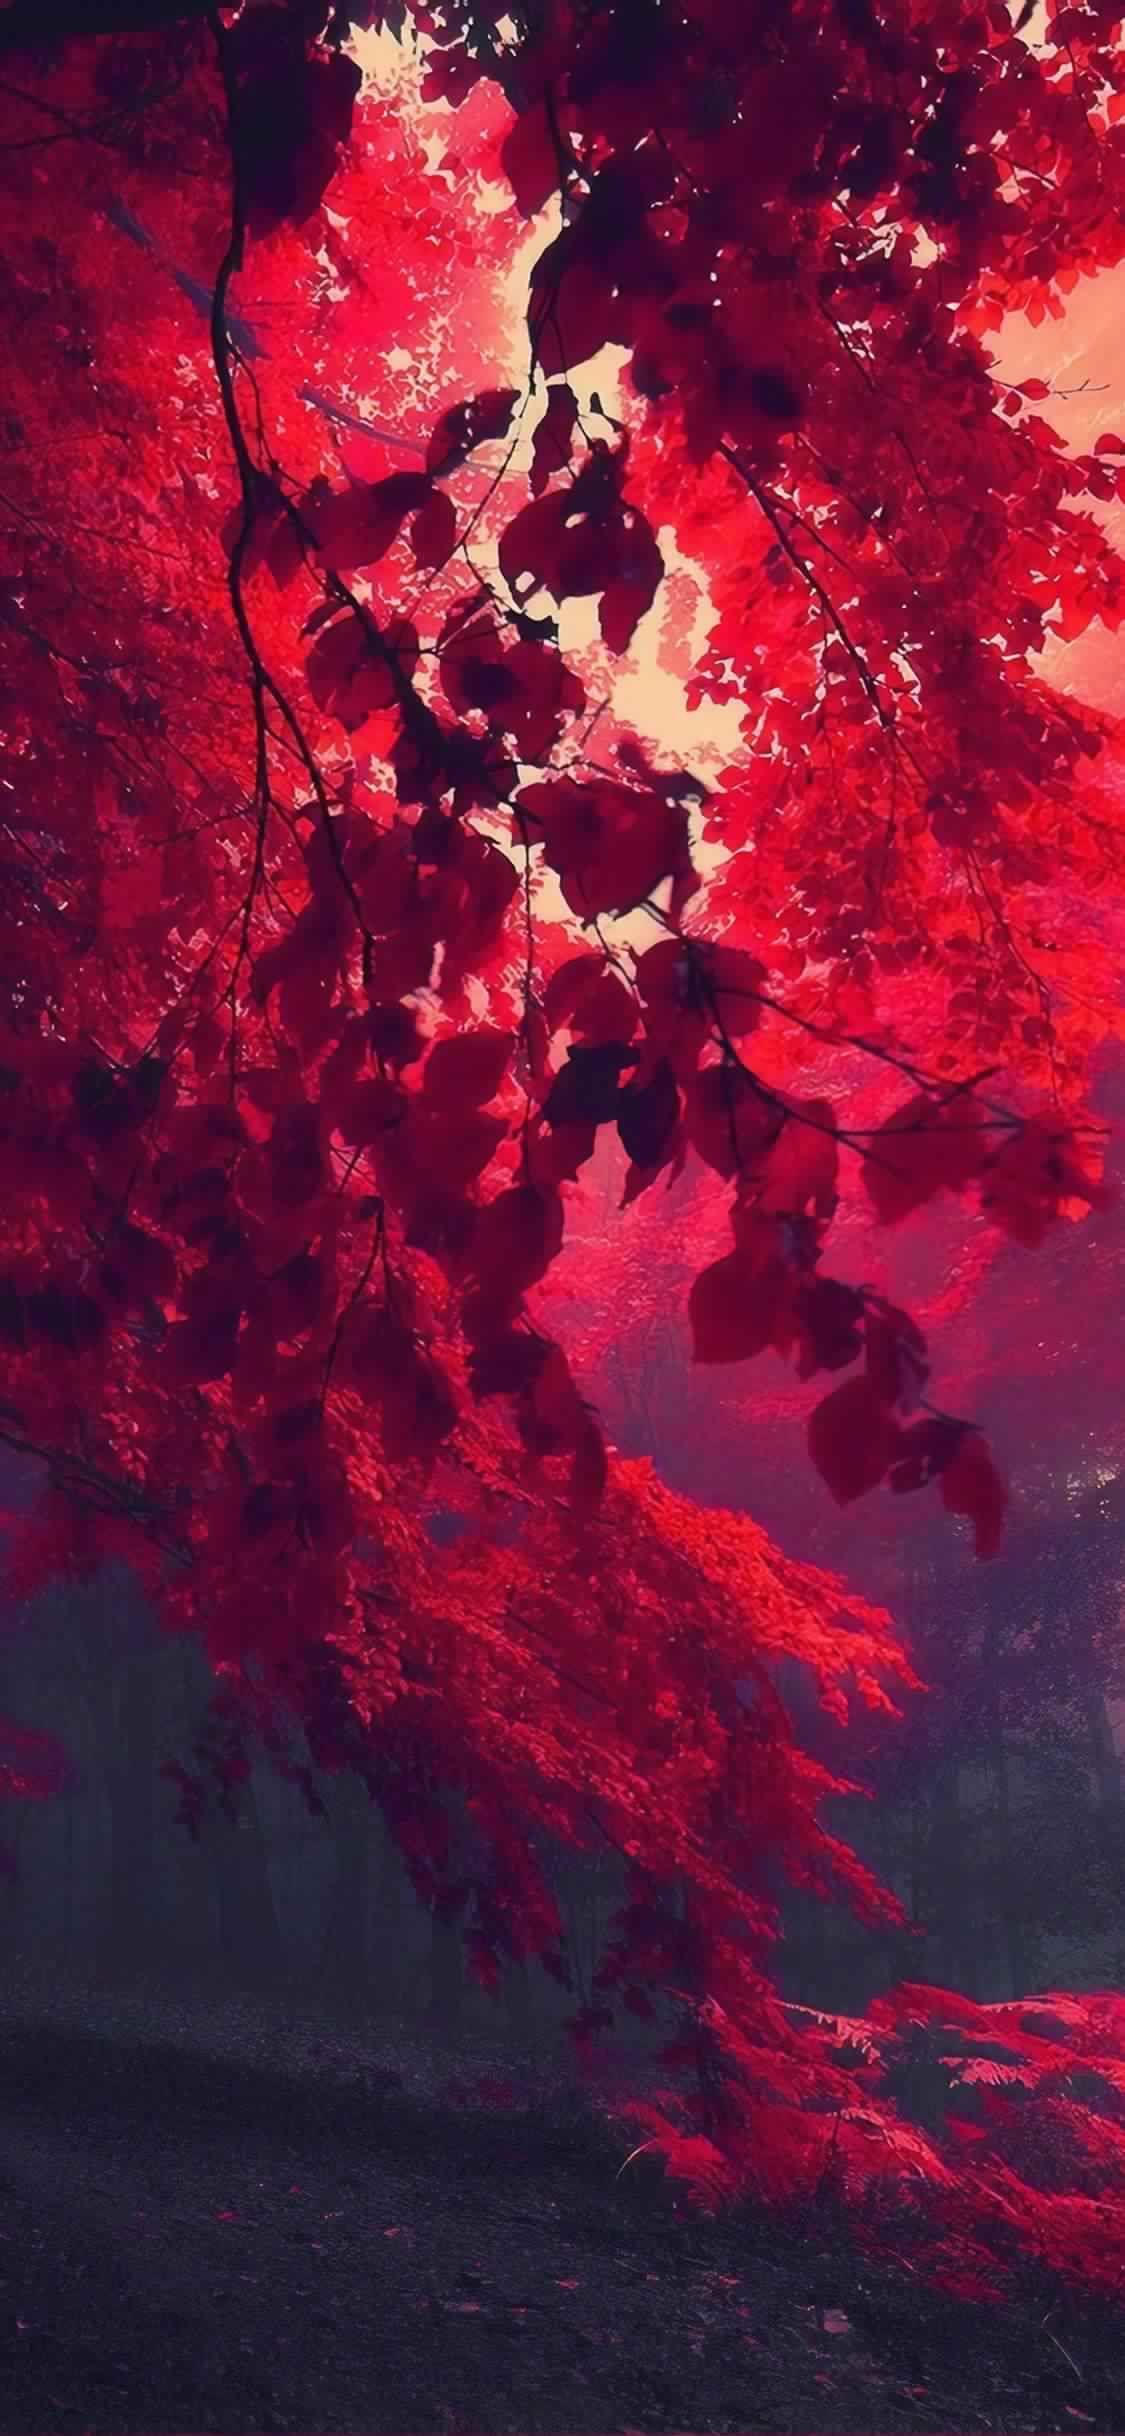 iPhone 11 Wallpaper Red autumn 4K HD Download Free. HD Wallpaper &. D. iPhone wallpaper texture, Abstract iphone wallpaper, Galaxy wallpaper iphone